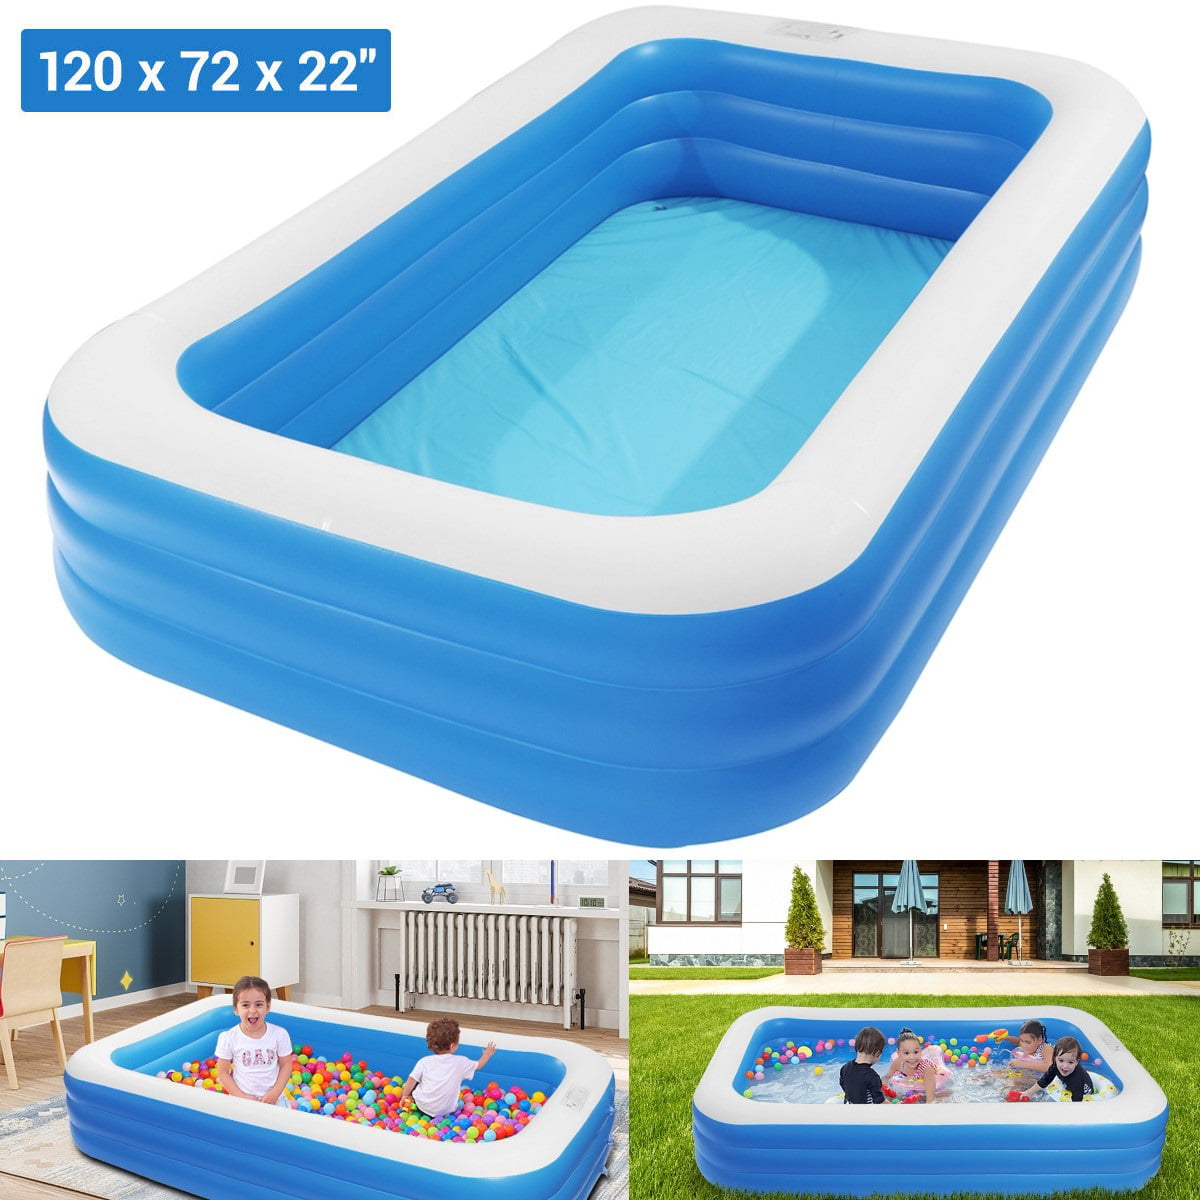 Details about   Inflatable Swimming Pool Family Full-Sized Inflatable Pools 118" x 72" x 22" 